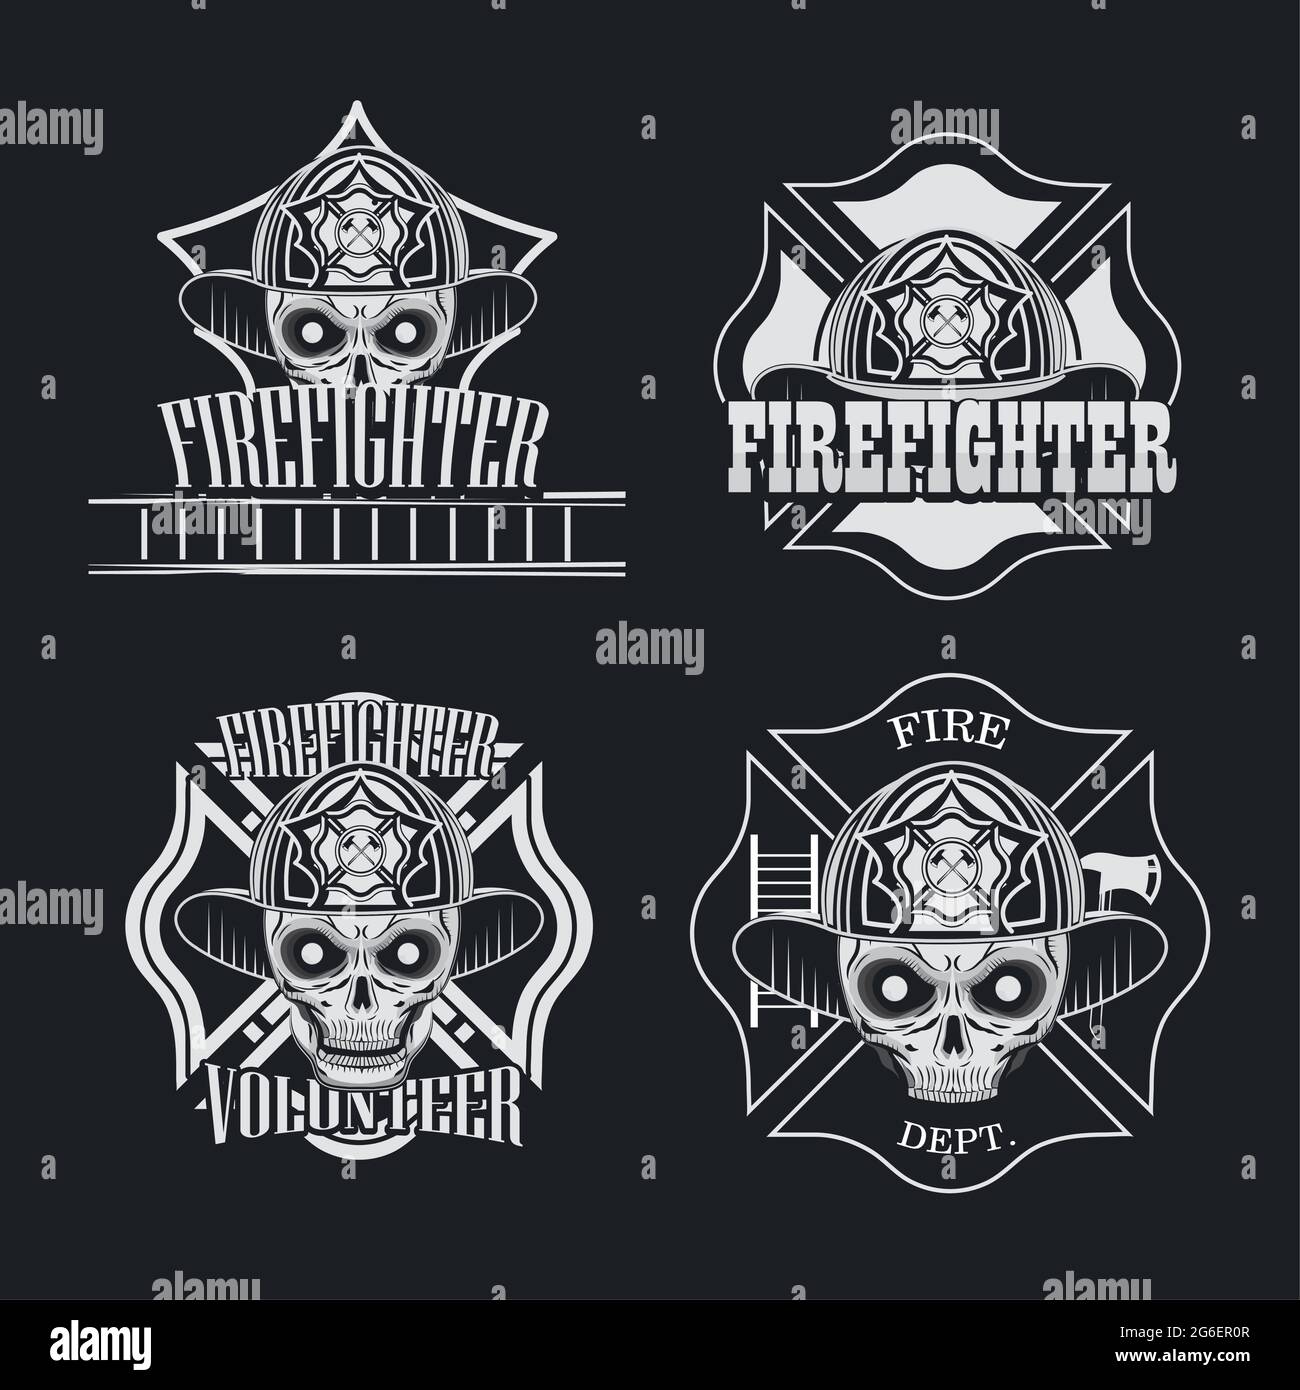 traditional firefighter symbols